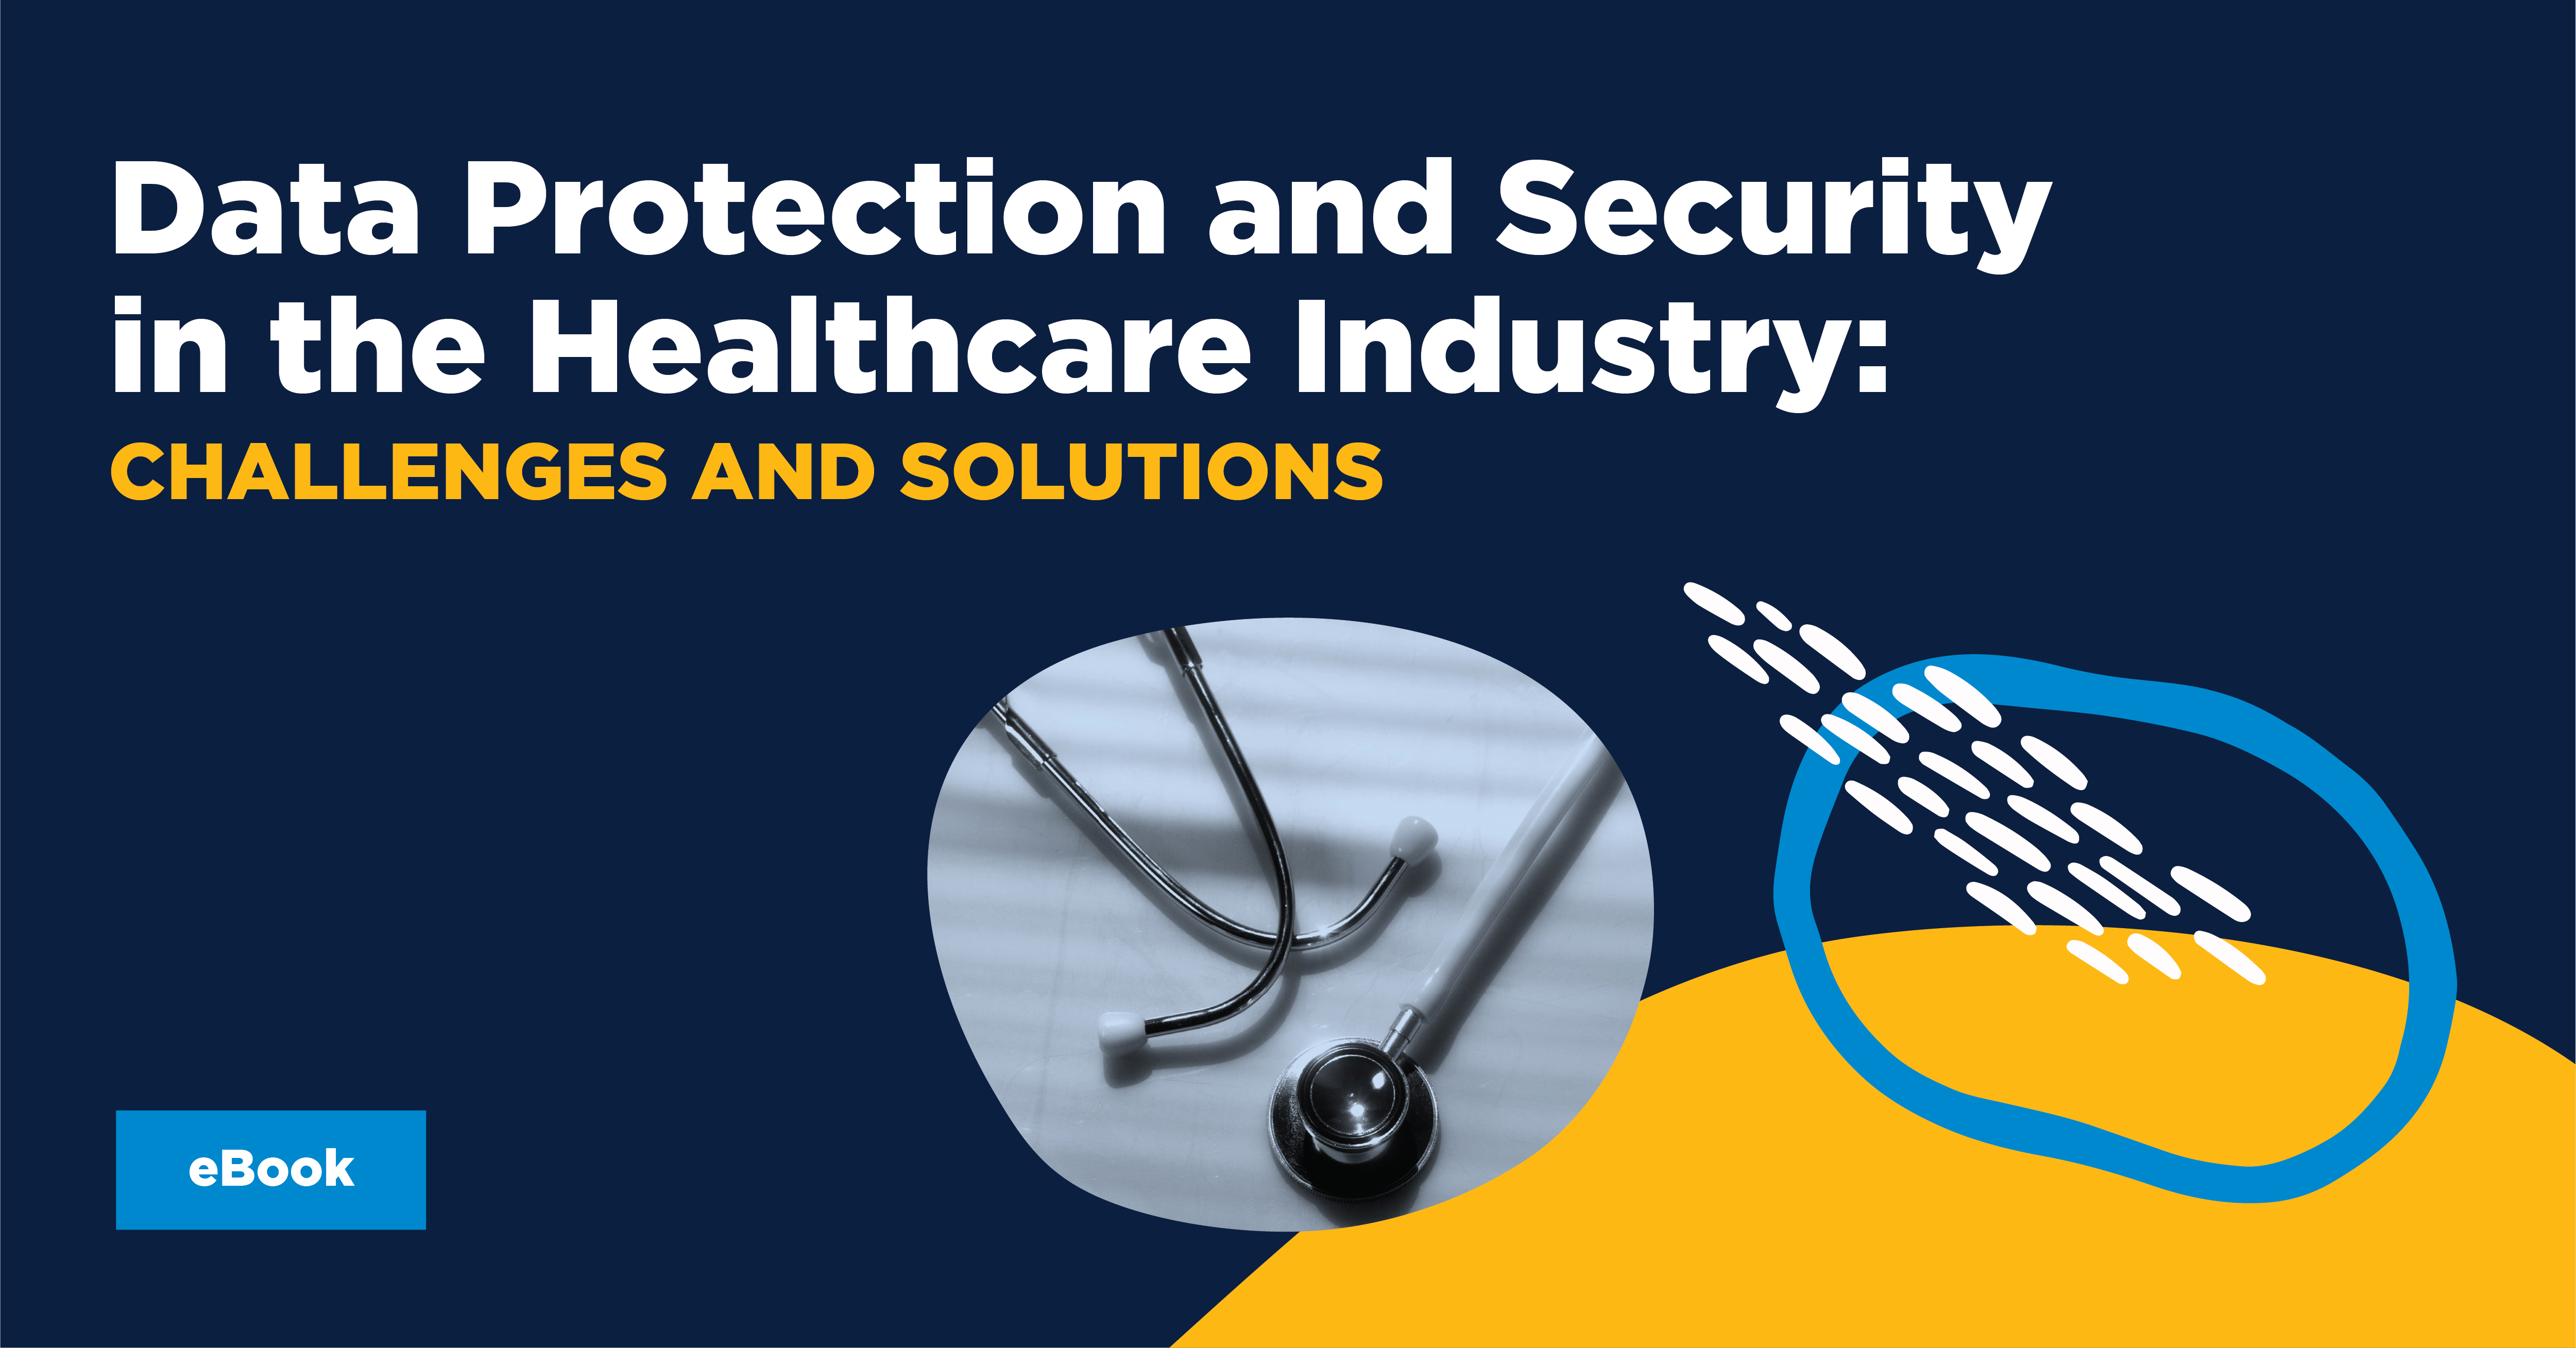 Data Protection and Security in the Healthcare Industry: Challenges and Solutions 